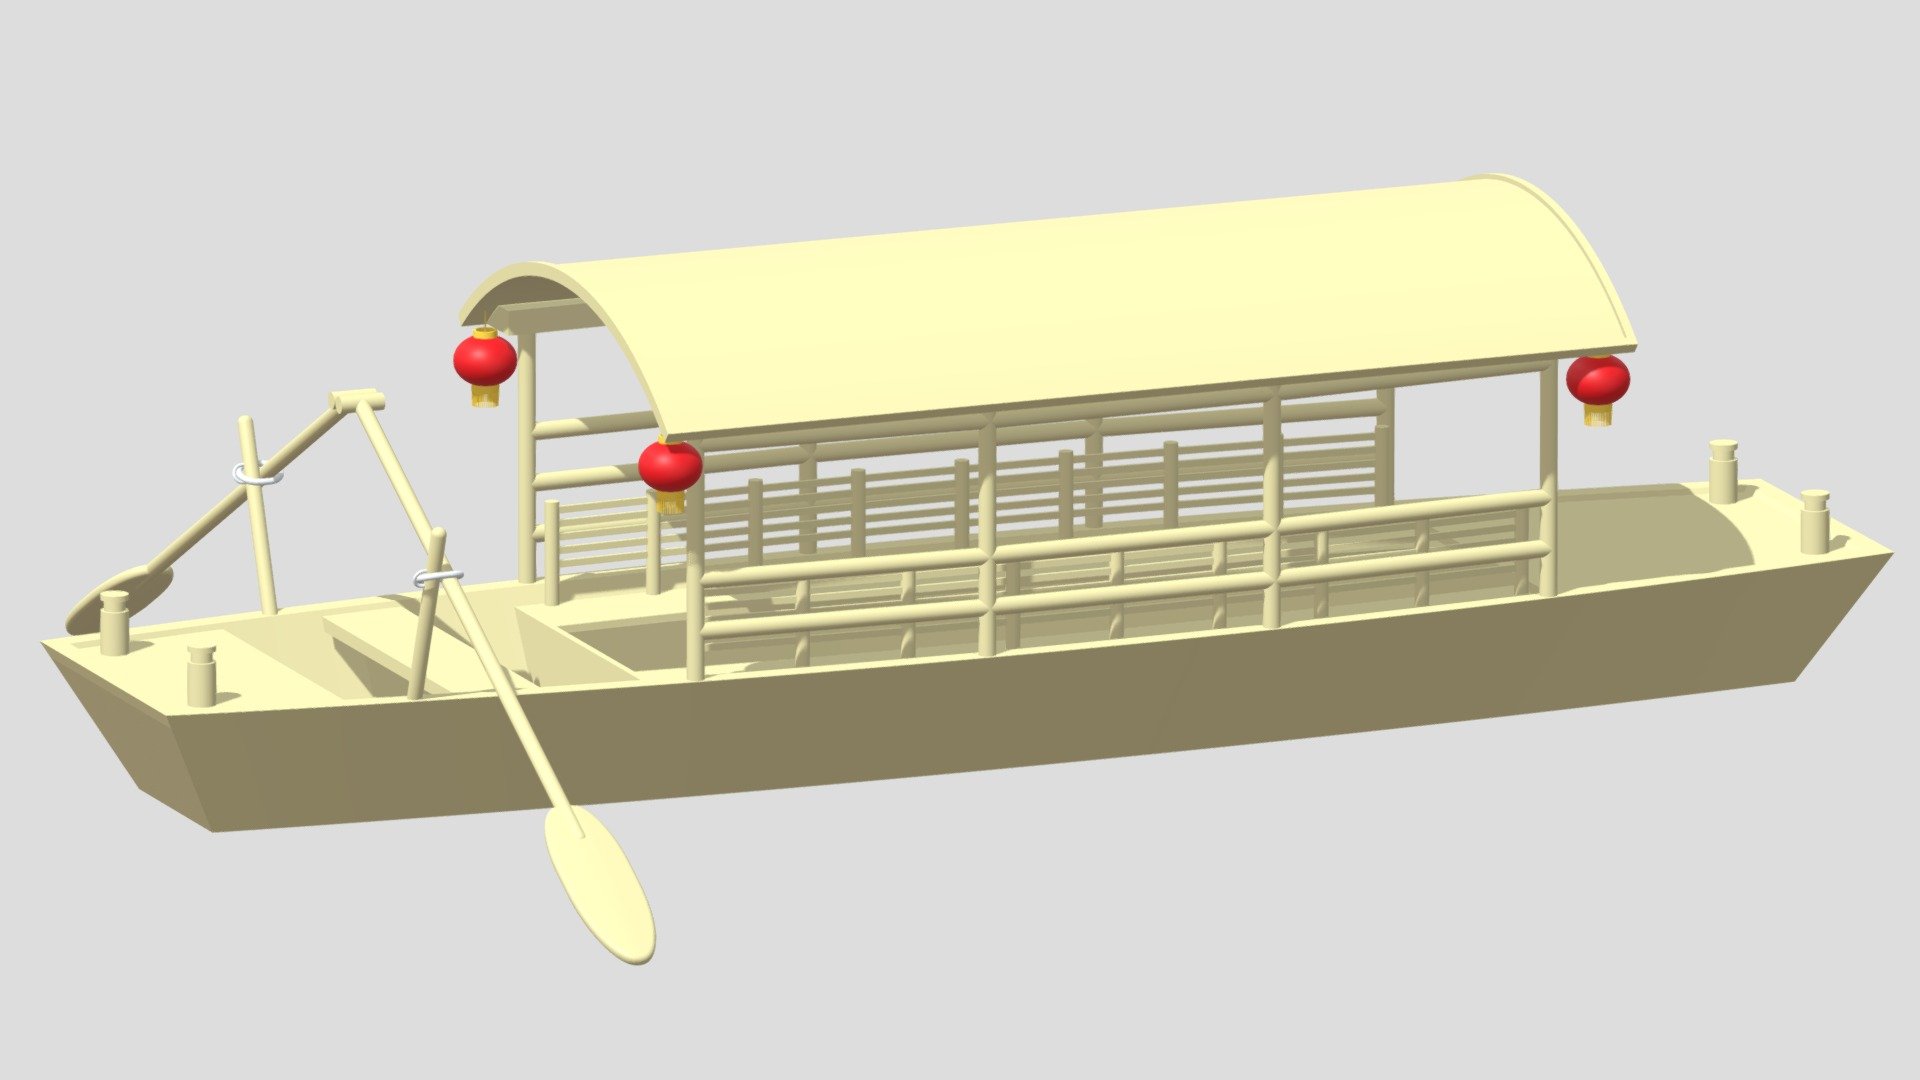 -Old Traditional Chinese Wooden Passenger Boat.

-This file contains 11 objects.

-Verts : 25,398 Faces : 21,760.

-Materials have the correct names.

-This product was created in Blender 3.0.

-Formats: blend, fbx, obj, c4d, dae, abc, glb, stl, unitypackage.

-We hope you enjoy this model.

-Thank you 3d model